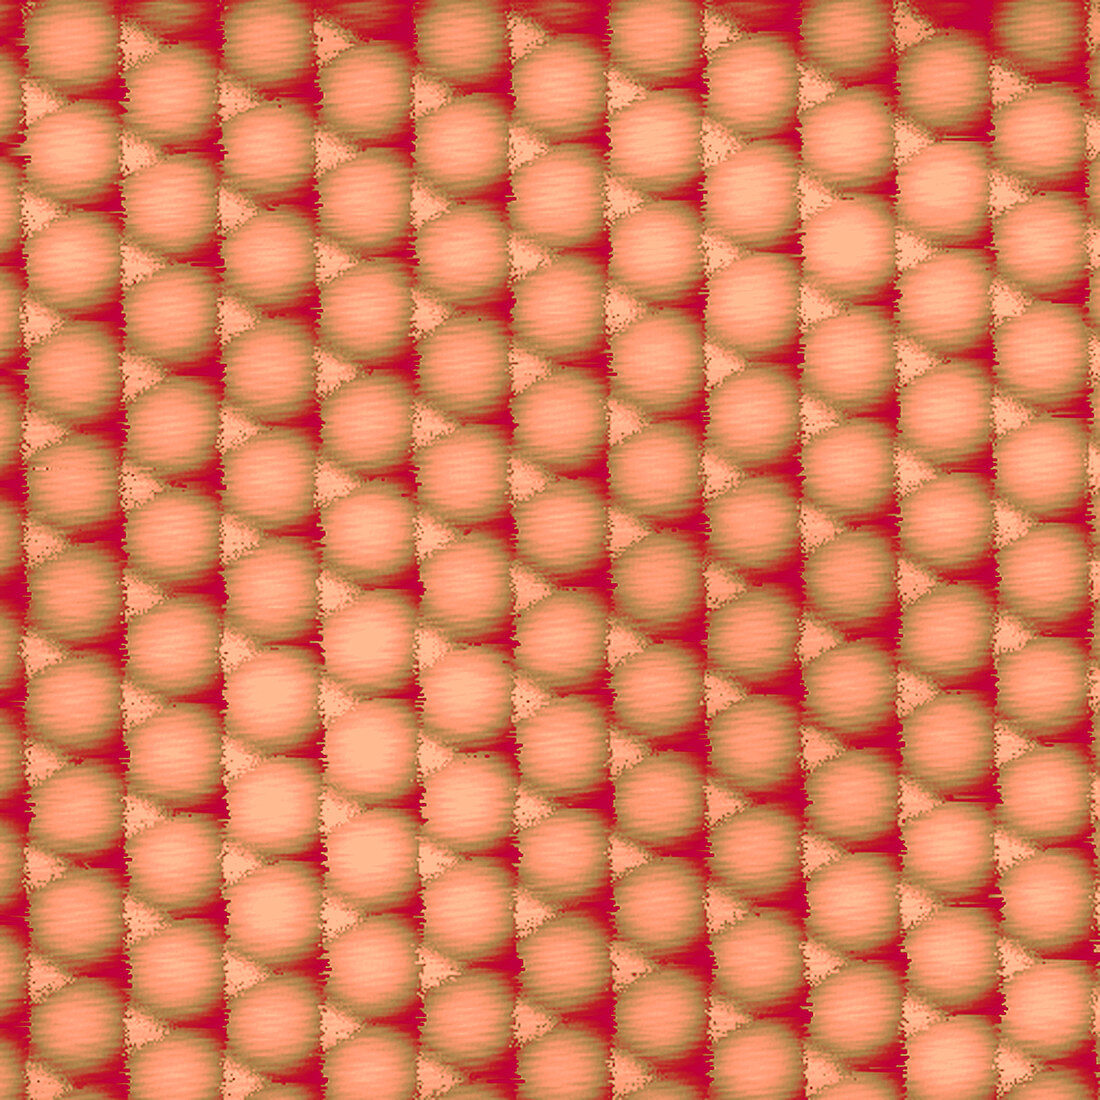 Lattice of copper atoms, scanning tunelling micrograph